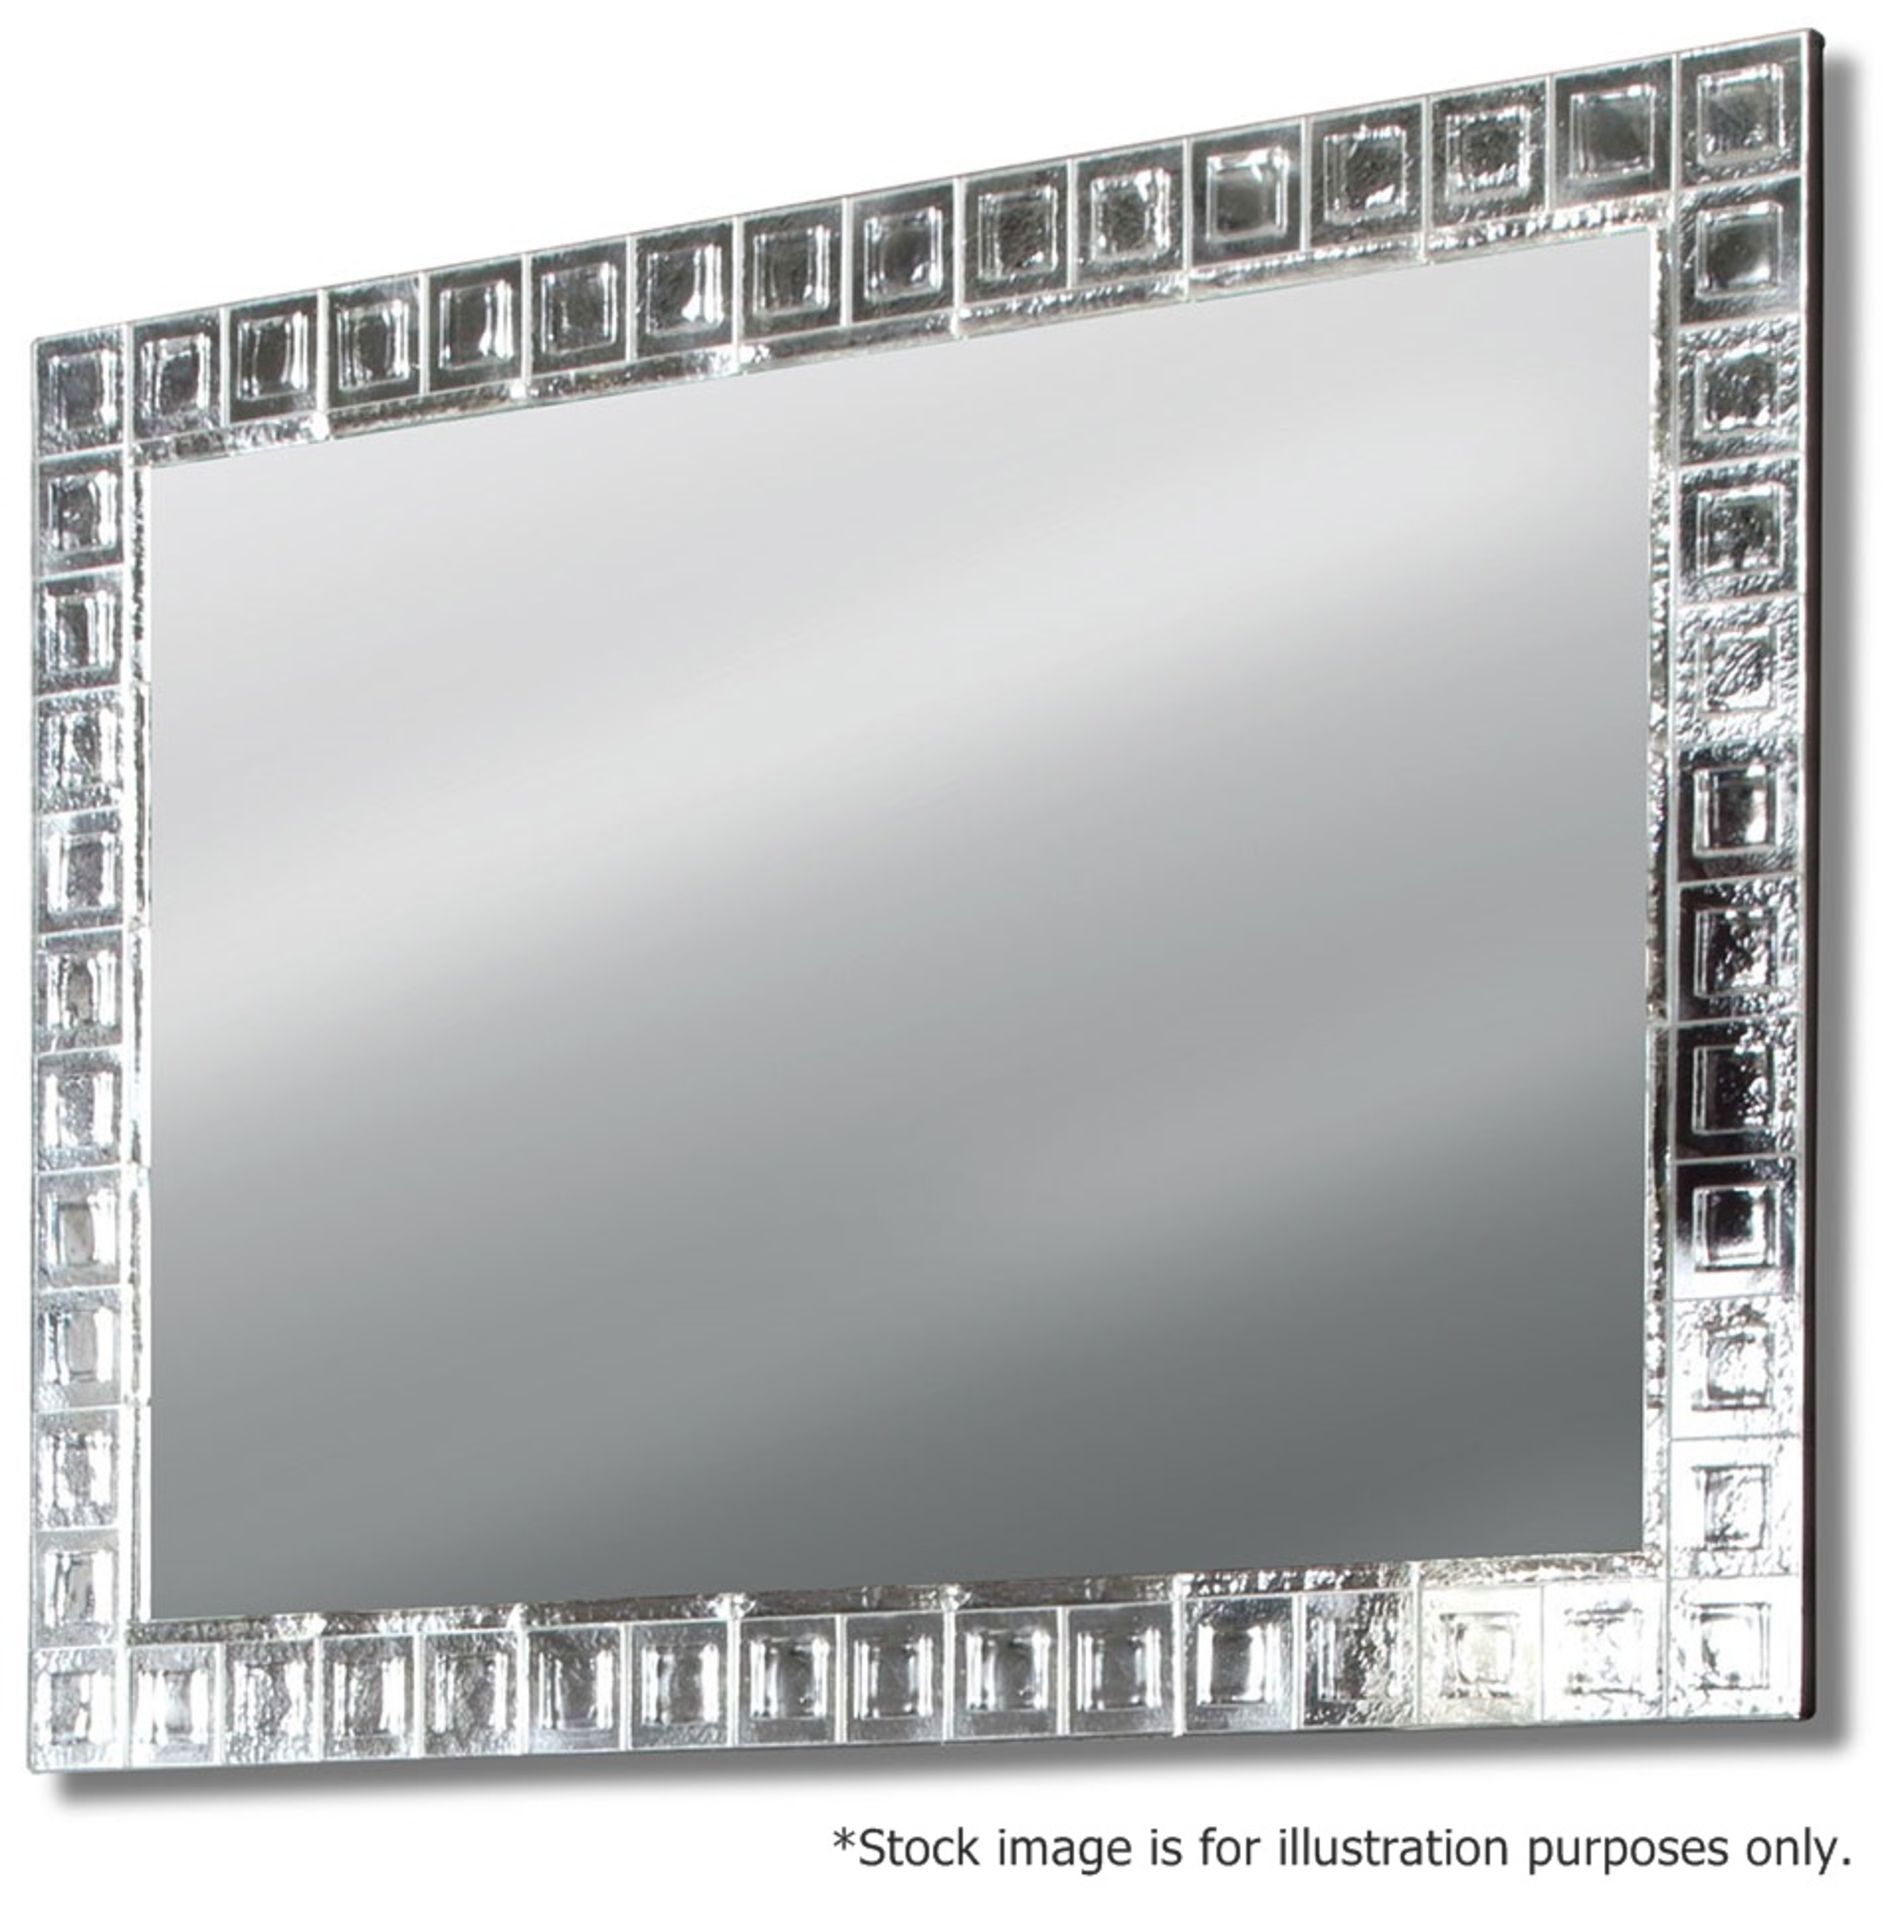 1 x GIORGIO COLLECTION 'Absolute' Luxury Italian Mirror With Murano Glass Frame - RRP £5,508 - Image 5 of 8